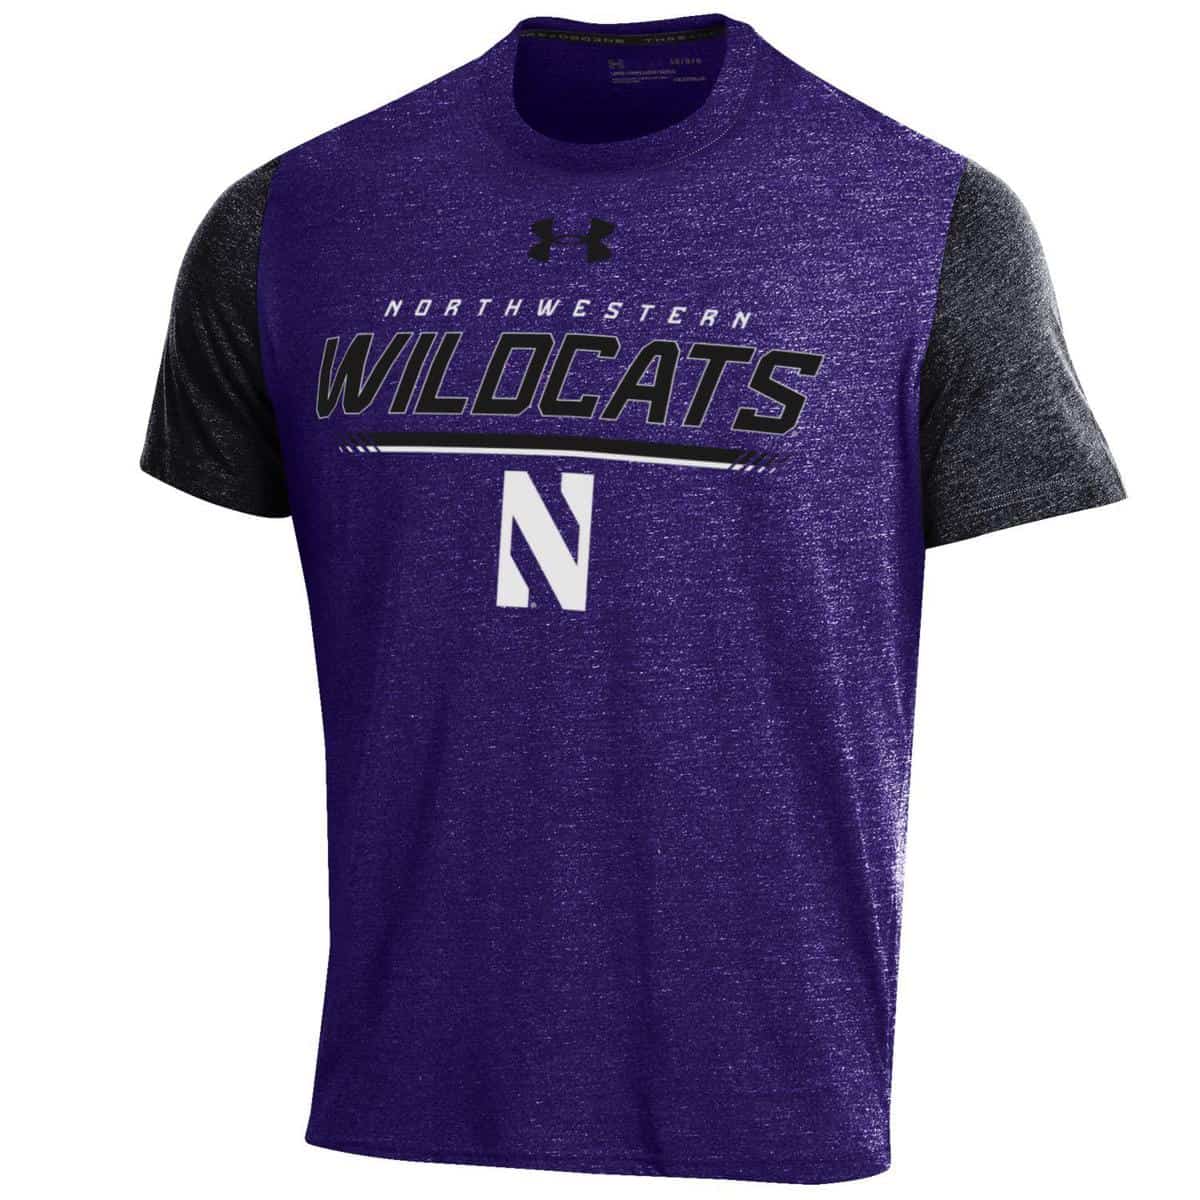 Northwestern Wildcats: Buy Short Sleeve T-Shirts and more | Campus Gear ...